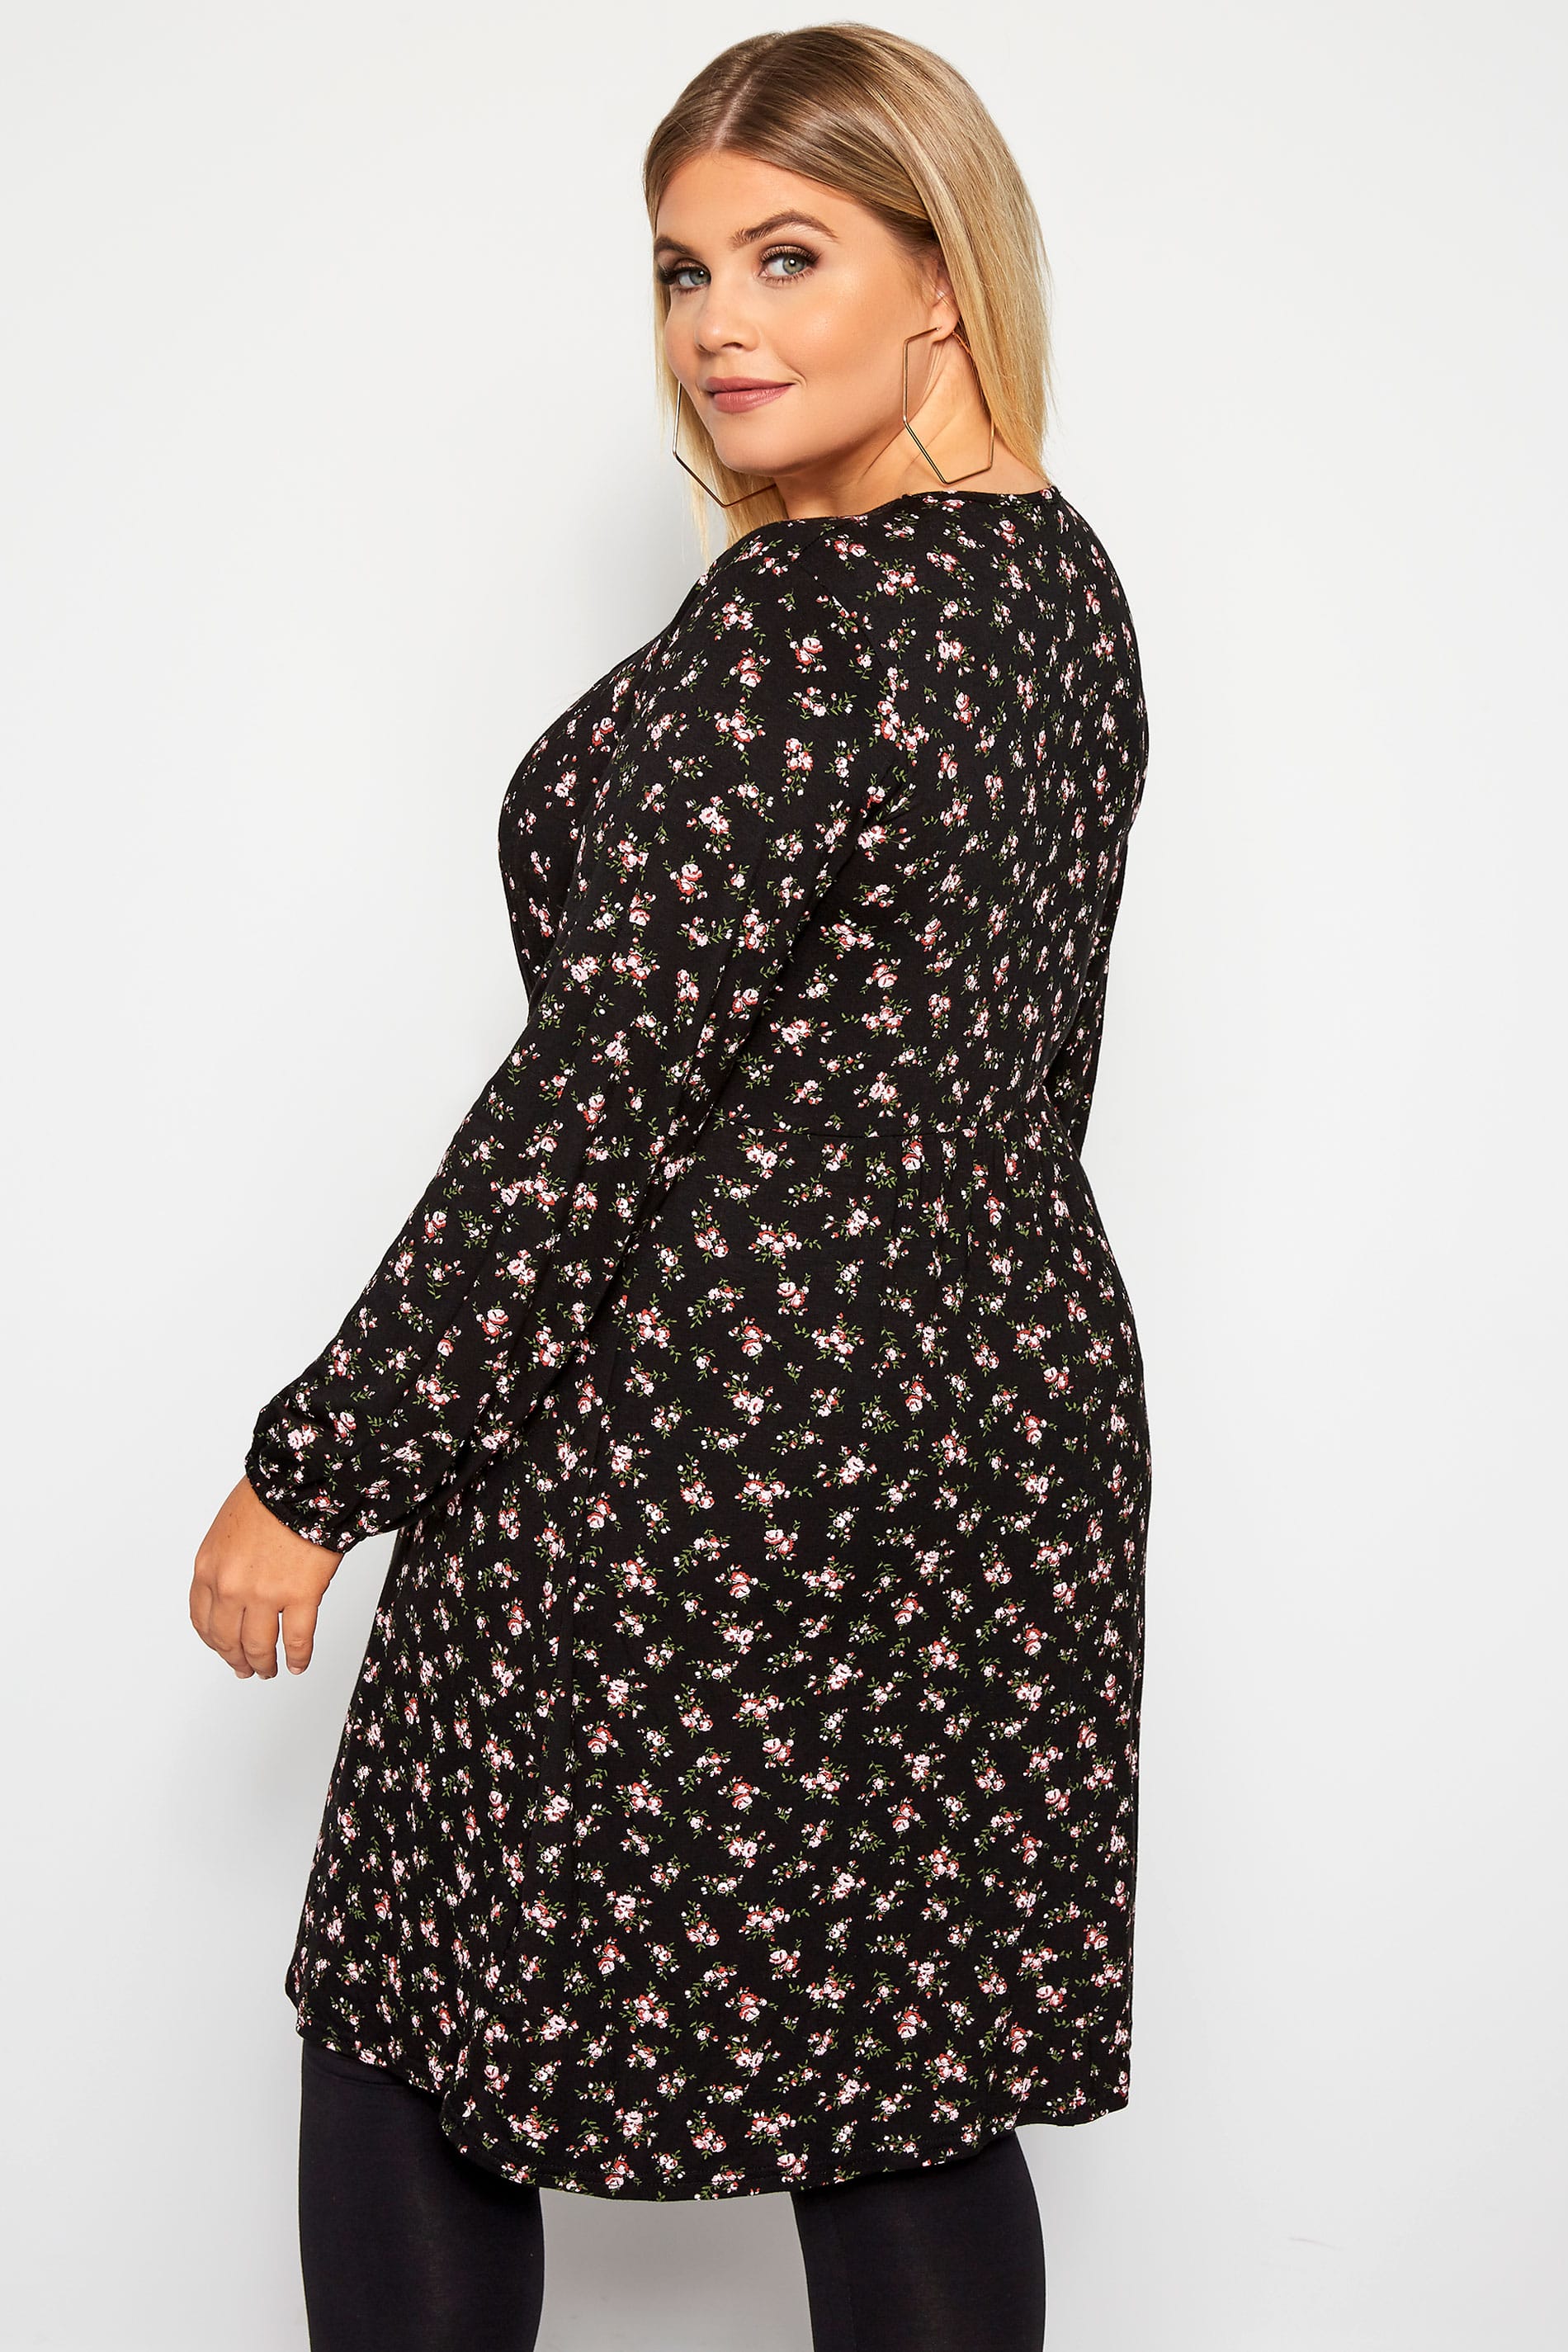 missguided milkmaid mini dress in black ditsy floral